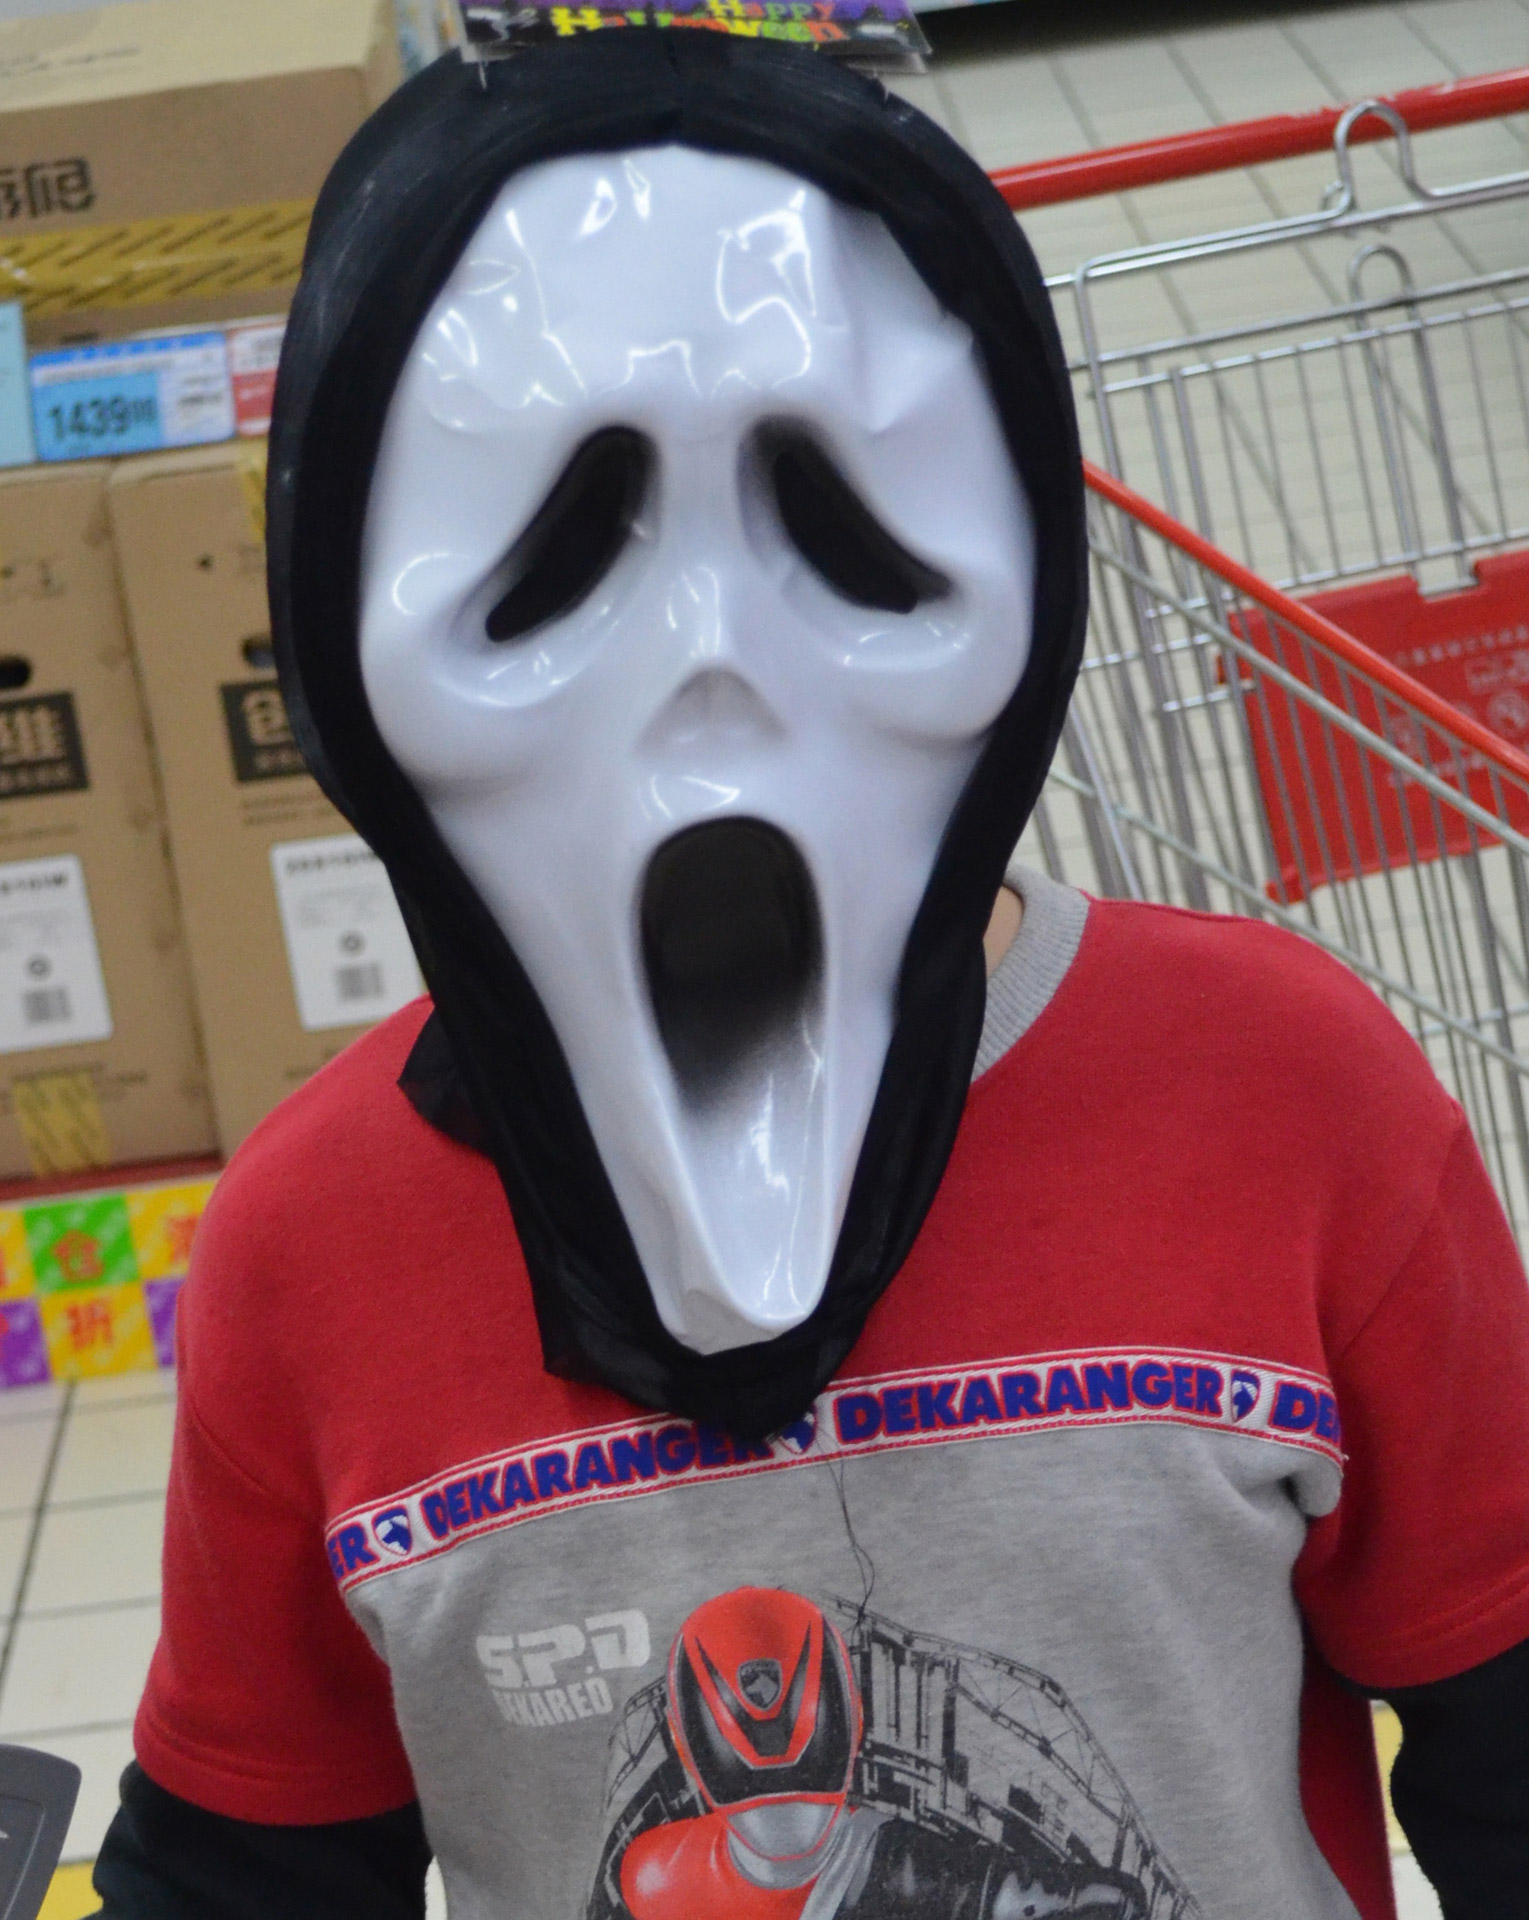 ghost-face-costume-halloween-child-free-image-from-needpix